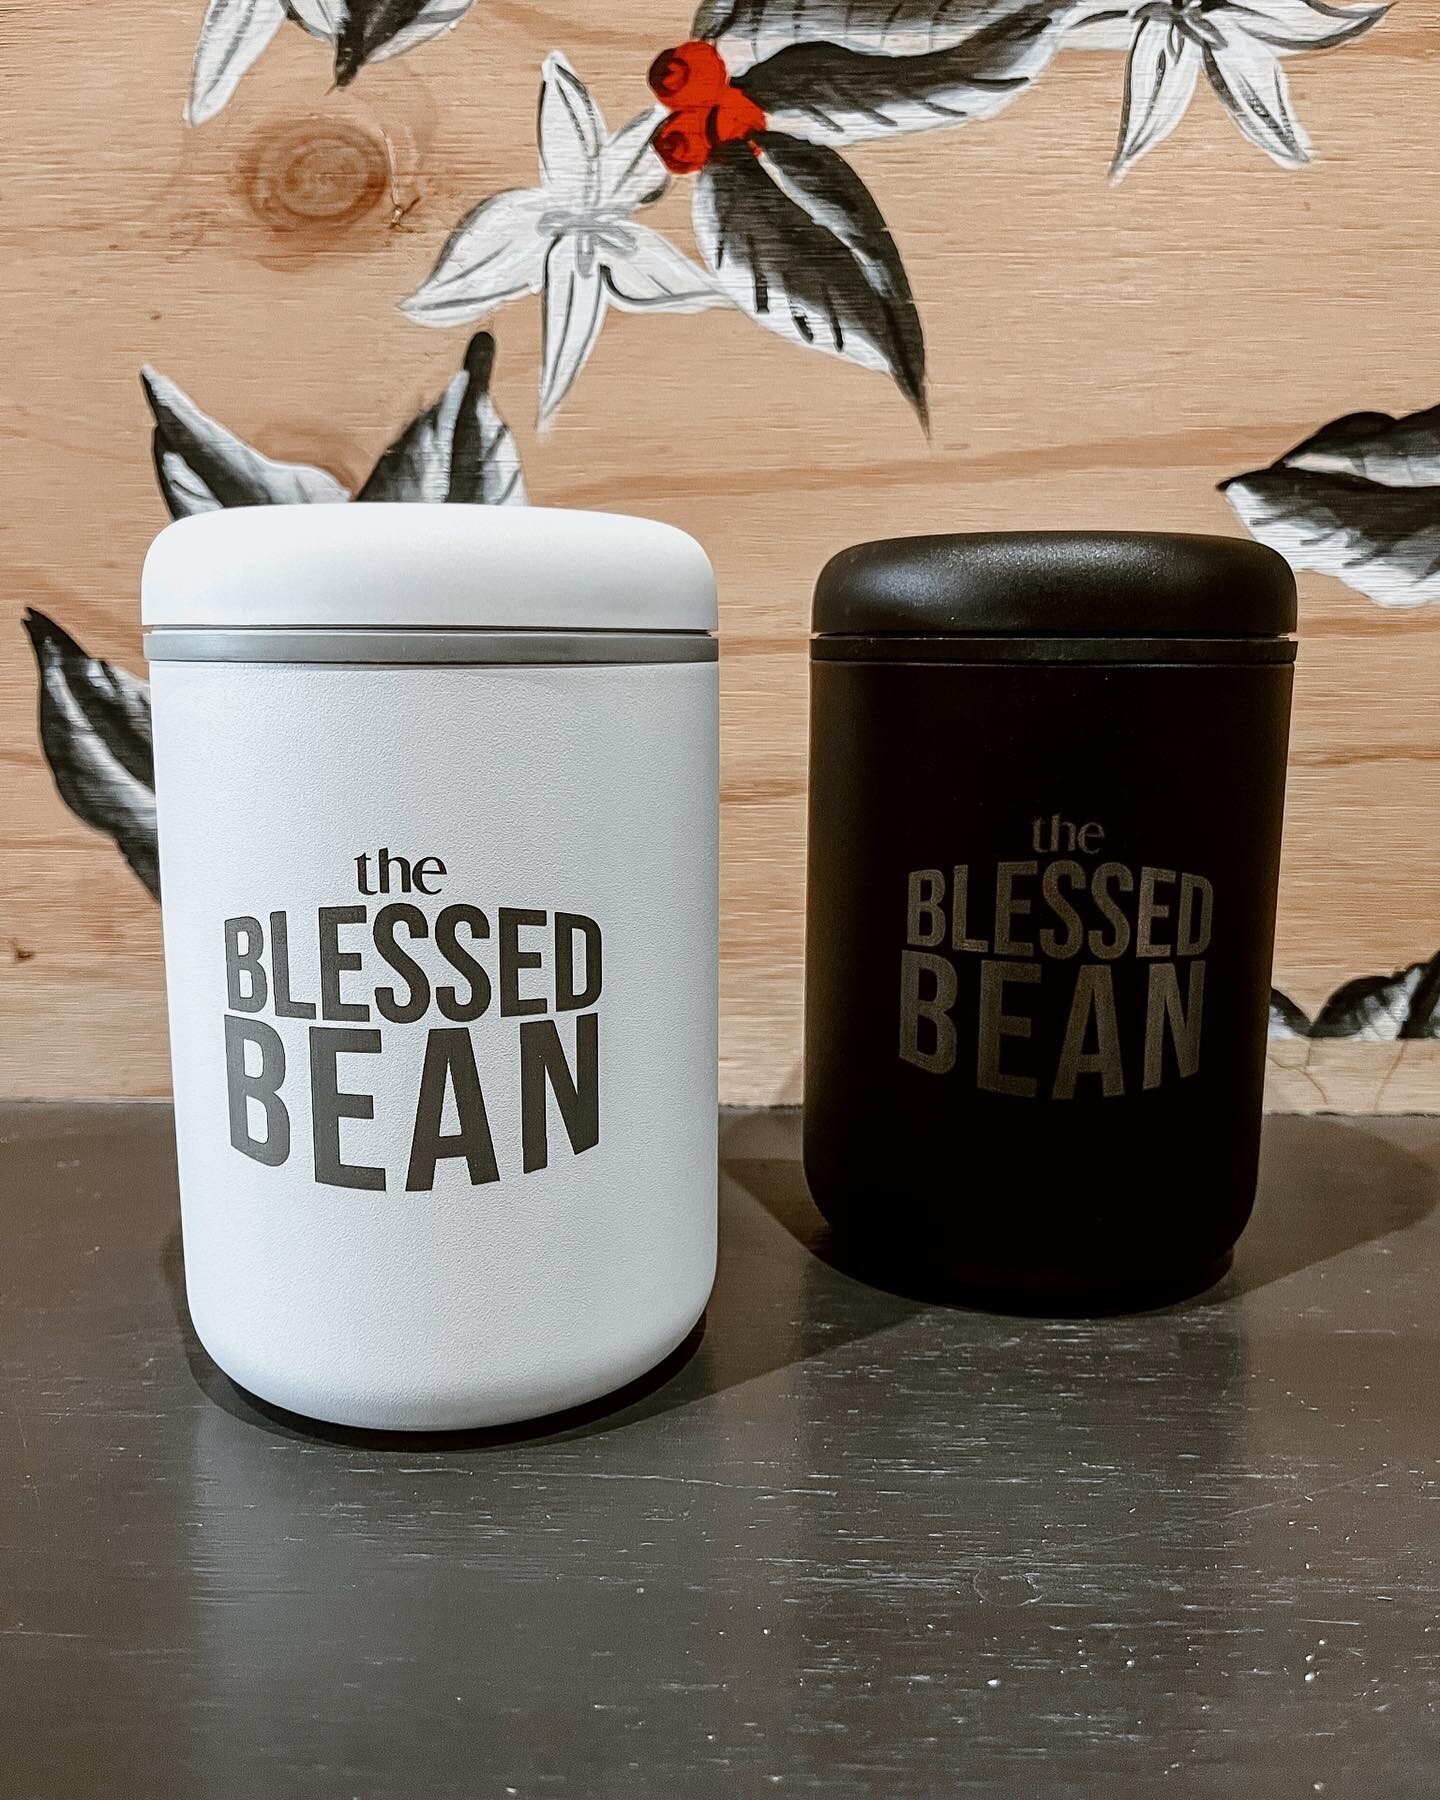 Our 400g vacuum canisters are back in stock! @fellowproducts 

#theblessedbean #coffeecanister #vacuumcanister #coffeebeans #coffeeroasters #coffee #coffeelover #storage #fellowproducts